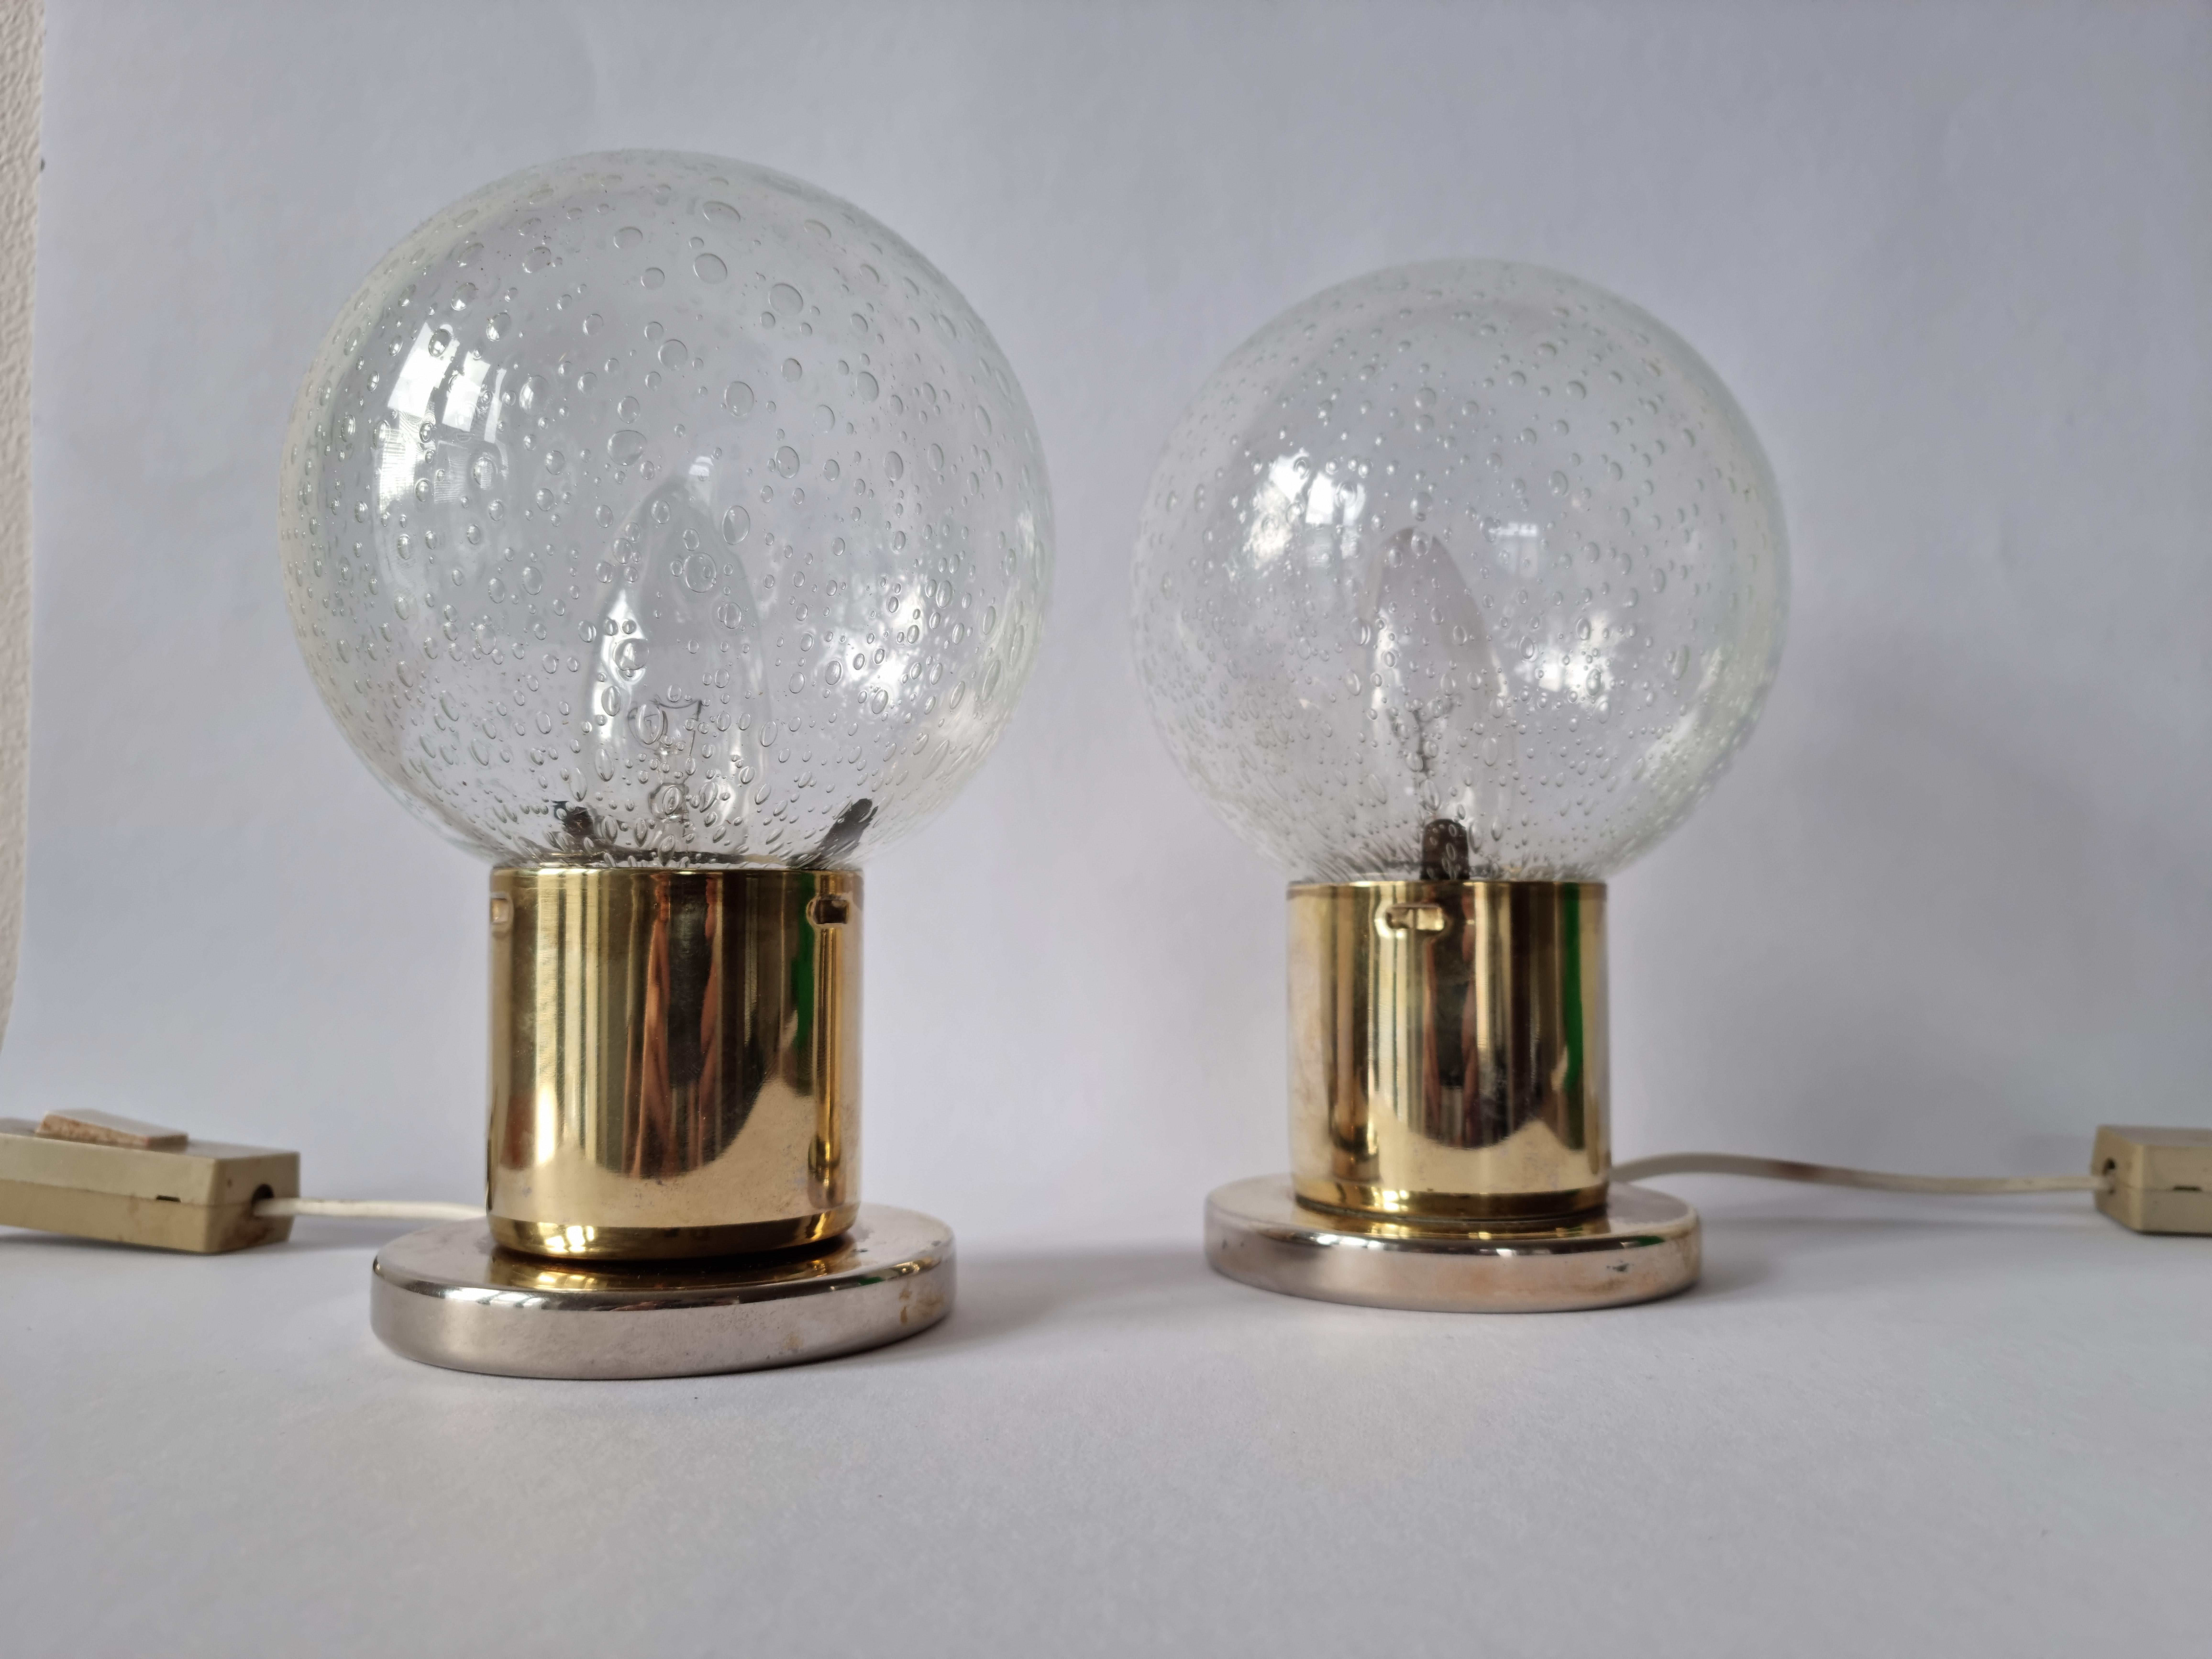 Pair of Midcentury Table Lamps Kamenicky Senov, 1970s For Sale 3